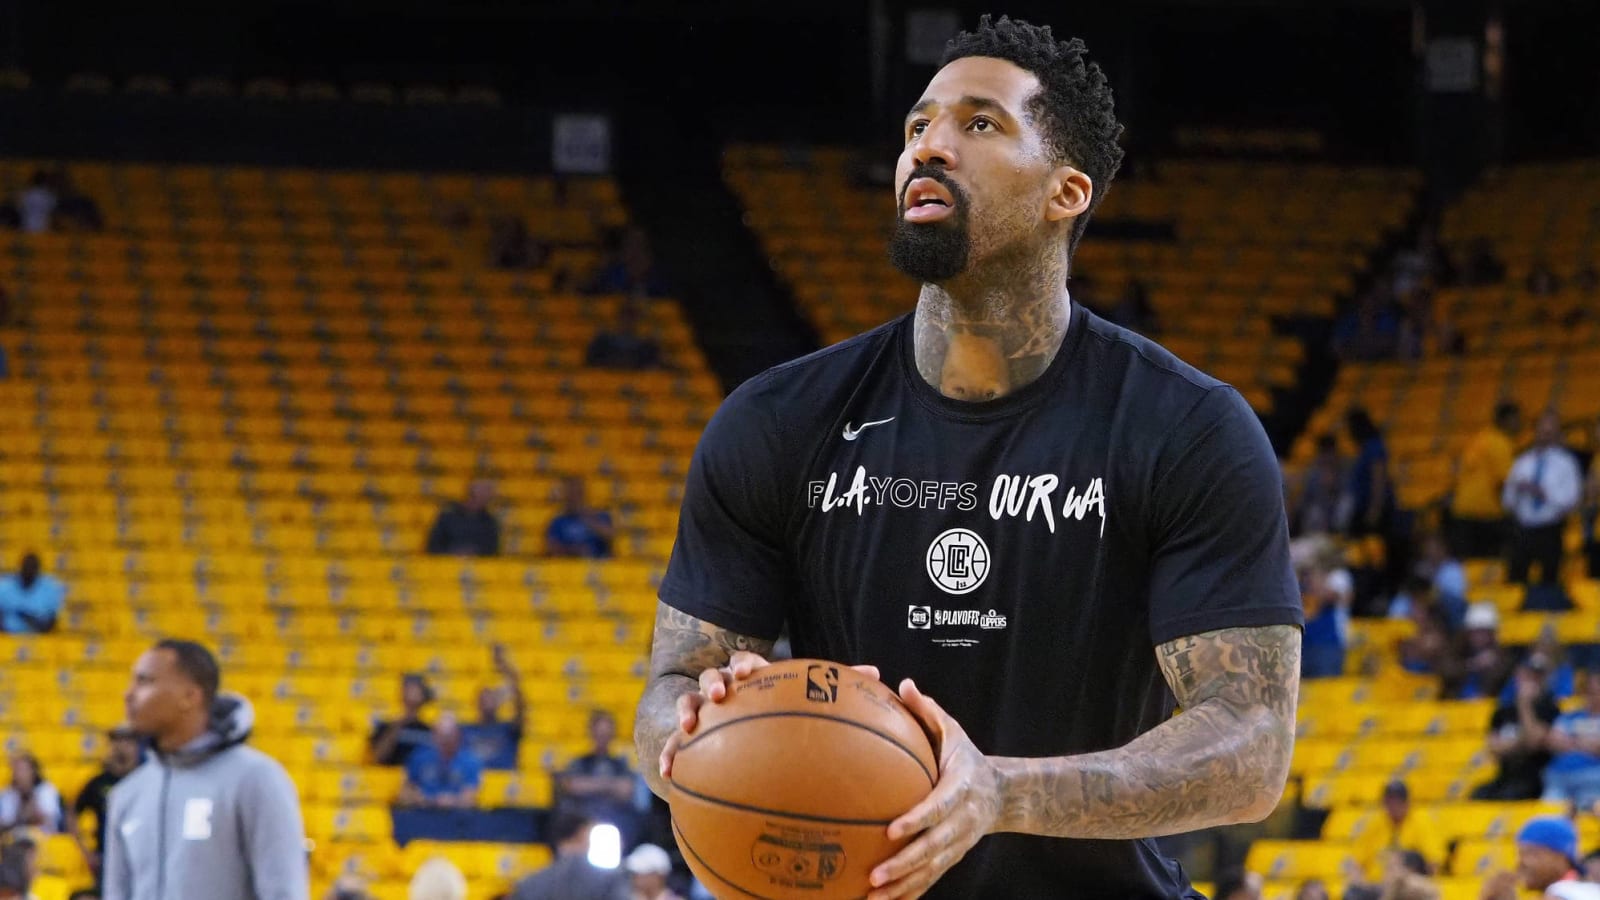 With suspension, Nets veteran Wilson Chandler admits he was 'in a dark place'